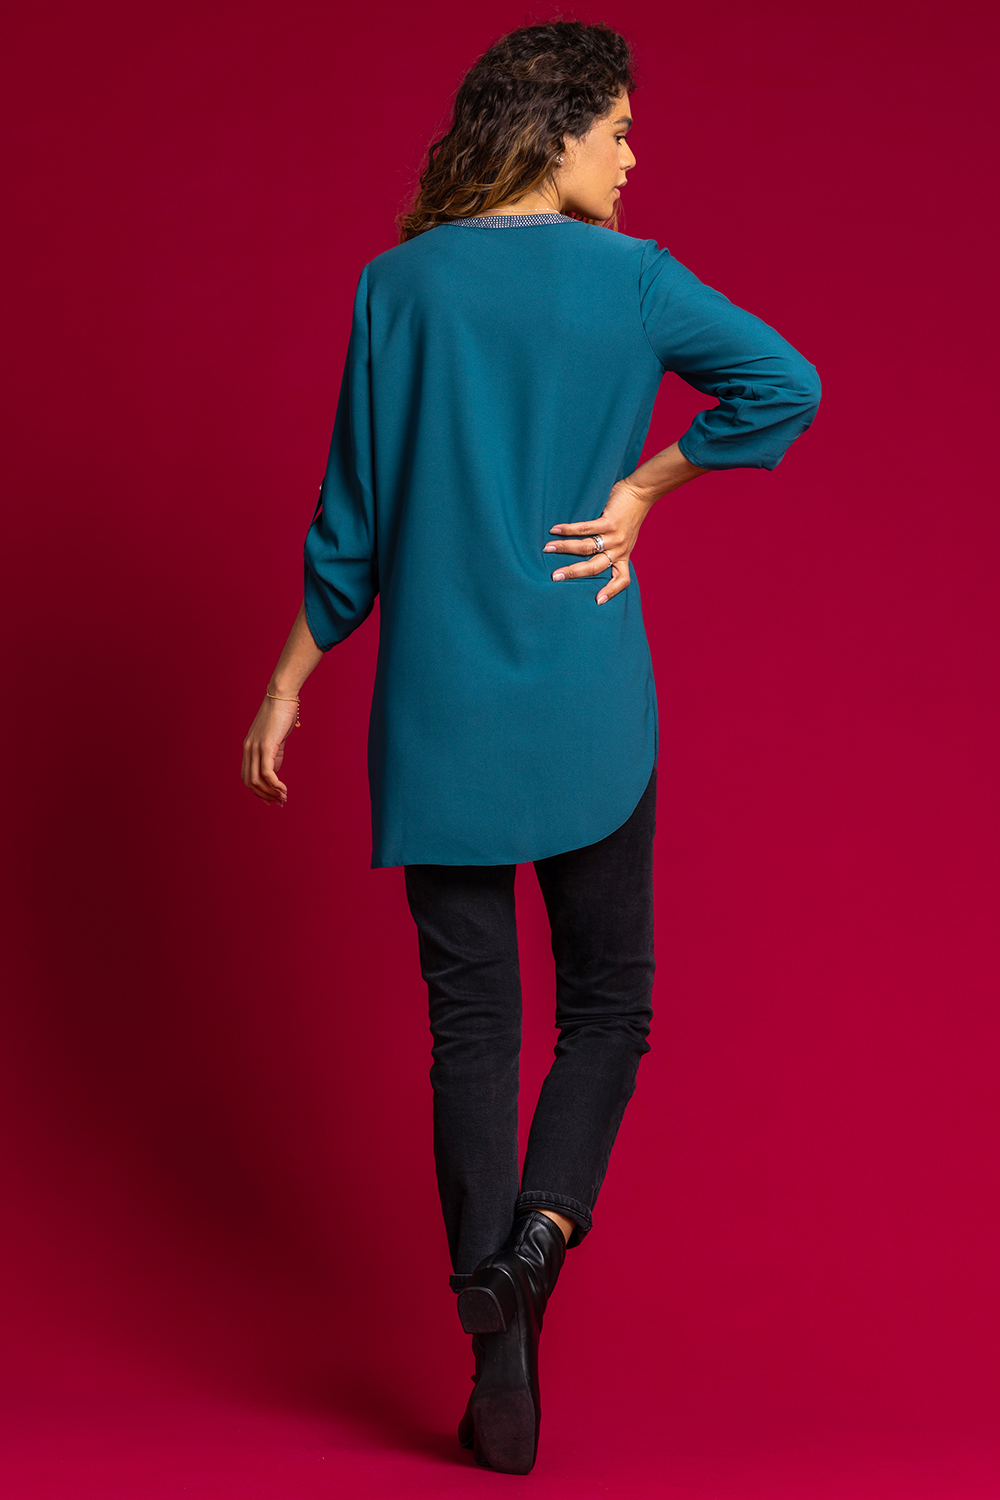 Teal Diamante Embellished Tunic Top, Image 2 of 4